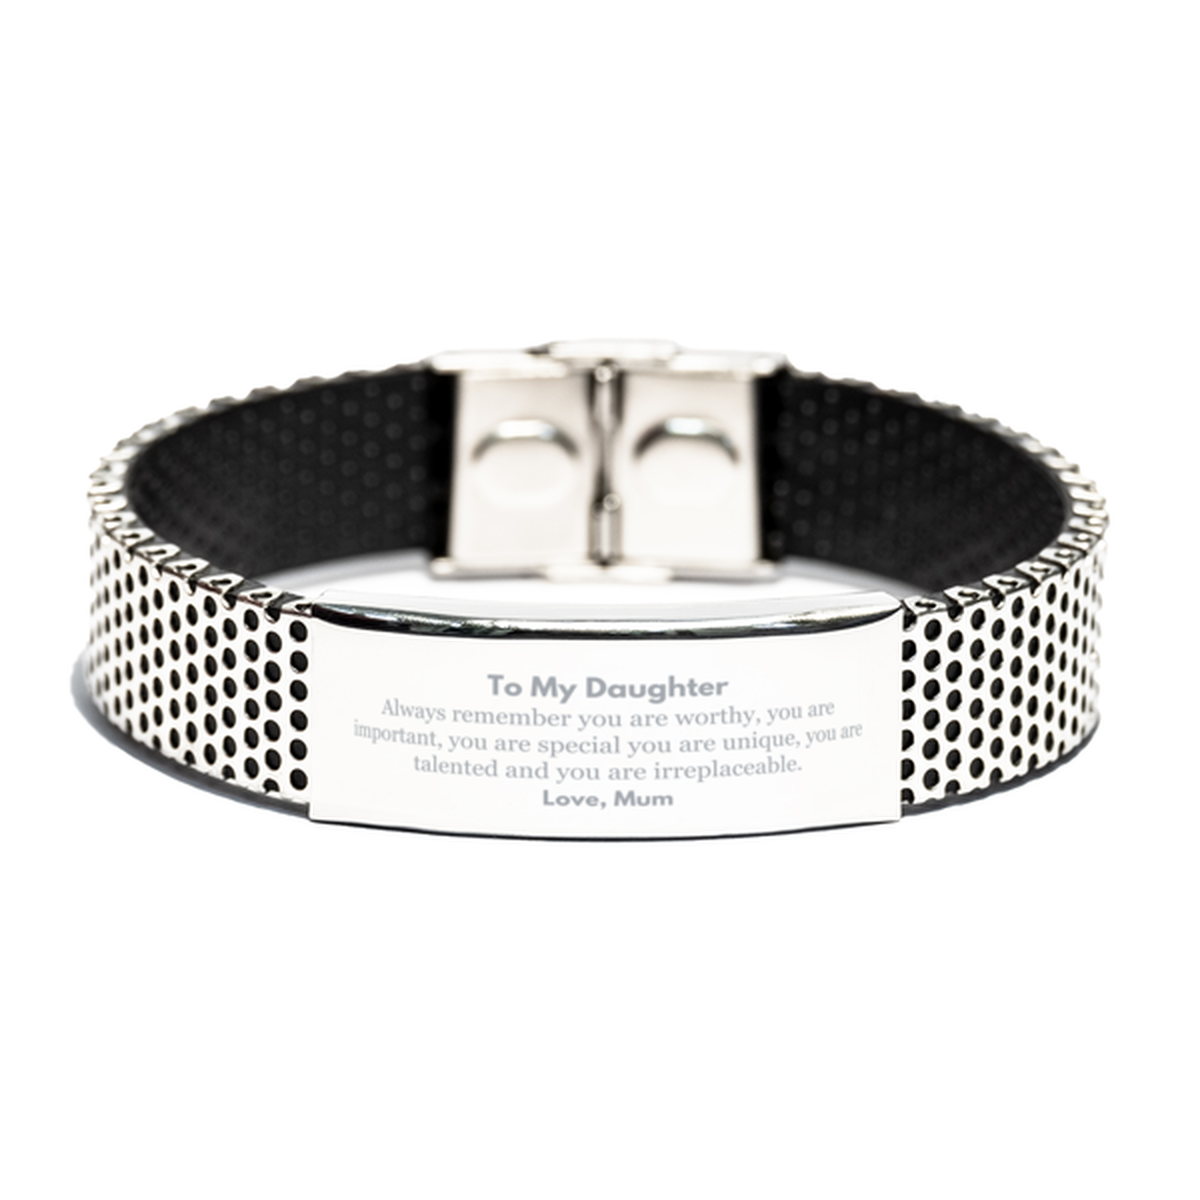 Daughter Birthday Gifts from Mum, Inspirational Stainless Steel Bracelet for Daughter Christmas Graduation Gifts for Daughter Always remember you are worthy, you are important. Love, Mum